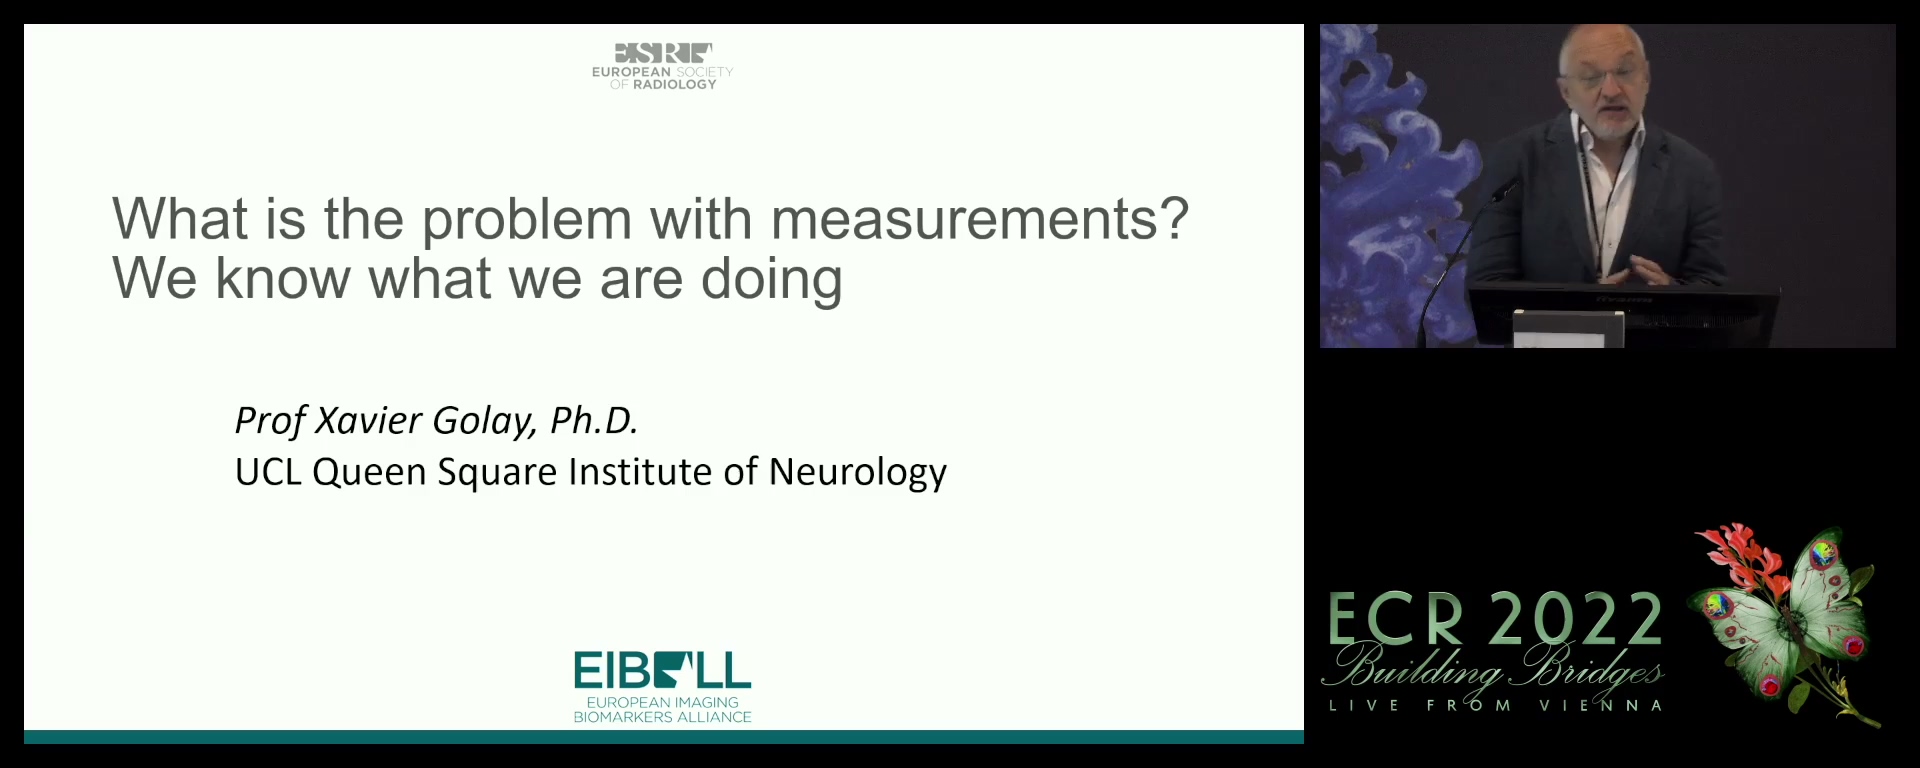 What is the problem with measurements? We know what we are doing: pro